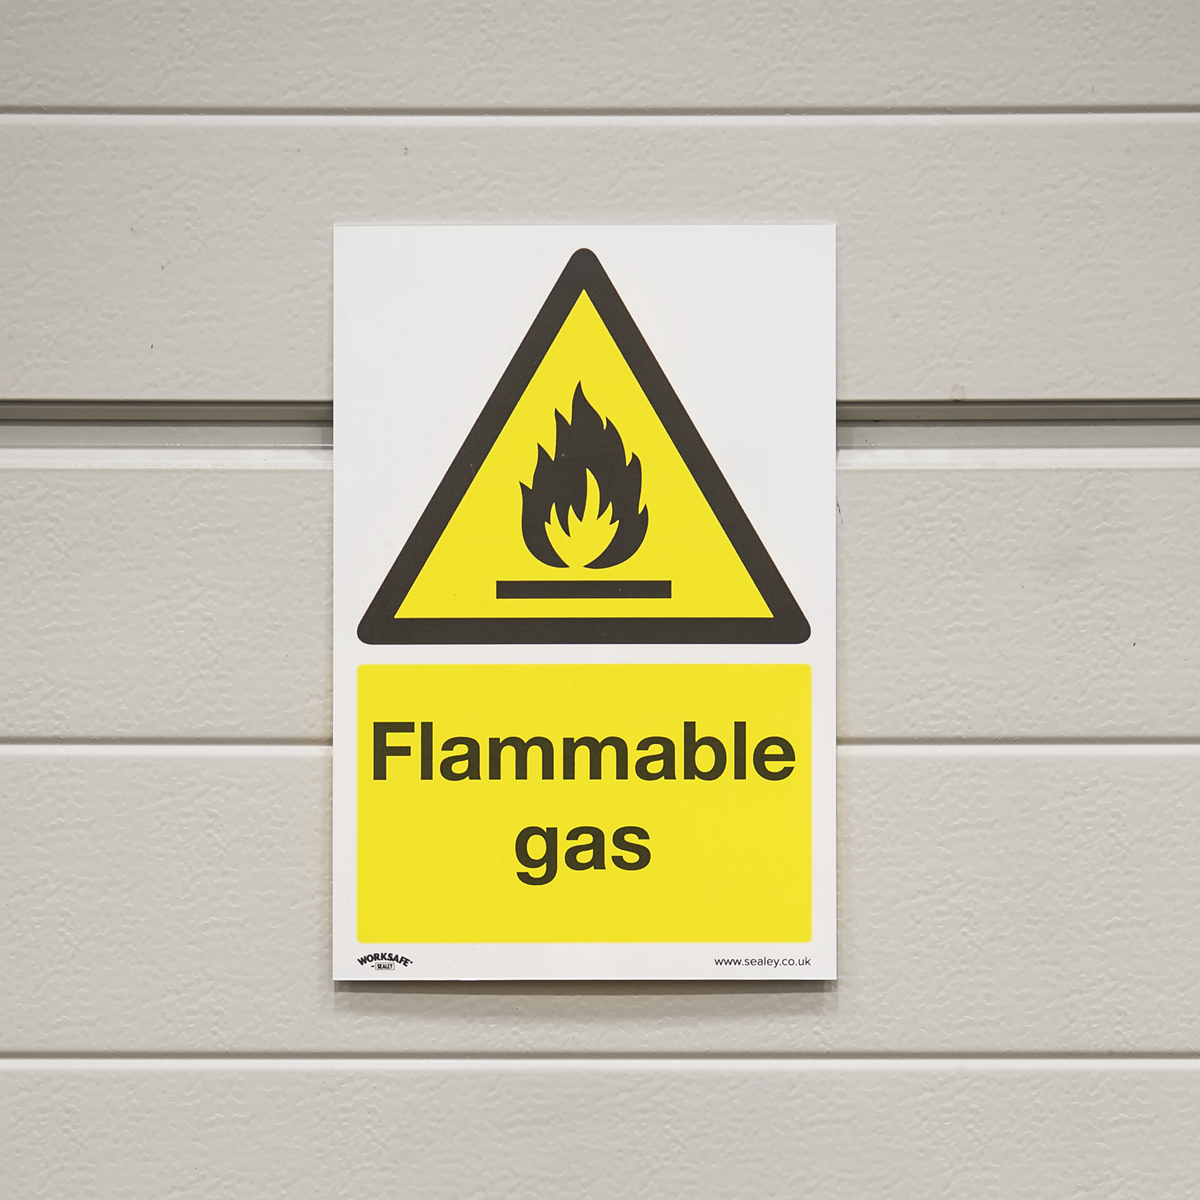 Warning Safety Sign - Flammable Gas - Self-Adhesive Vinyl - Pack of 10